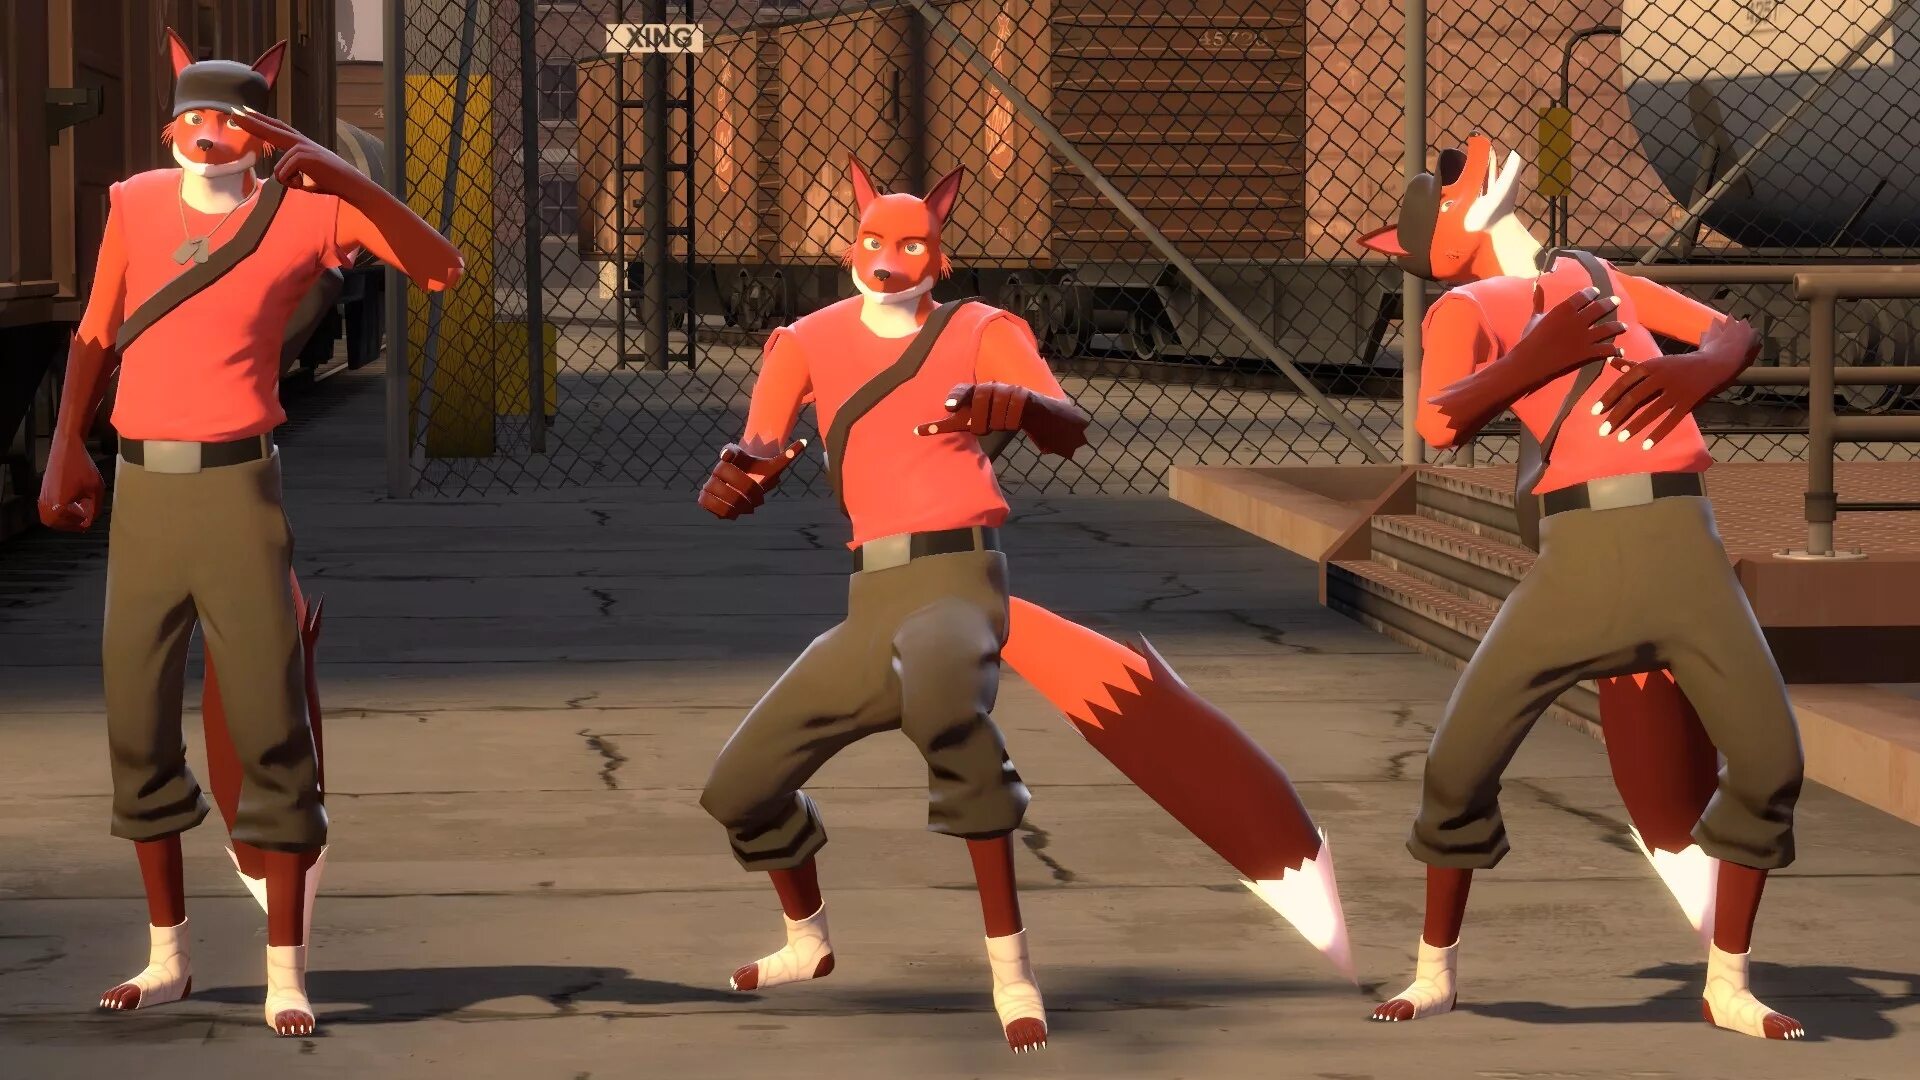 Tf2 Fox. Tf2 Scout furry. Scout tf2. Скаут тфл2. Fox ii